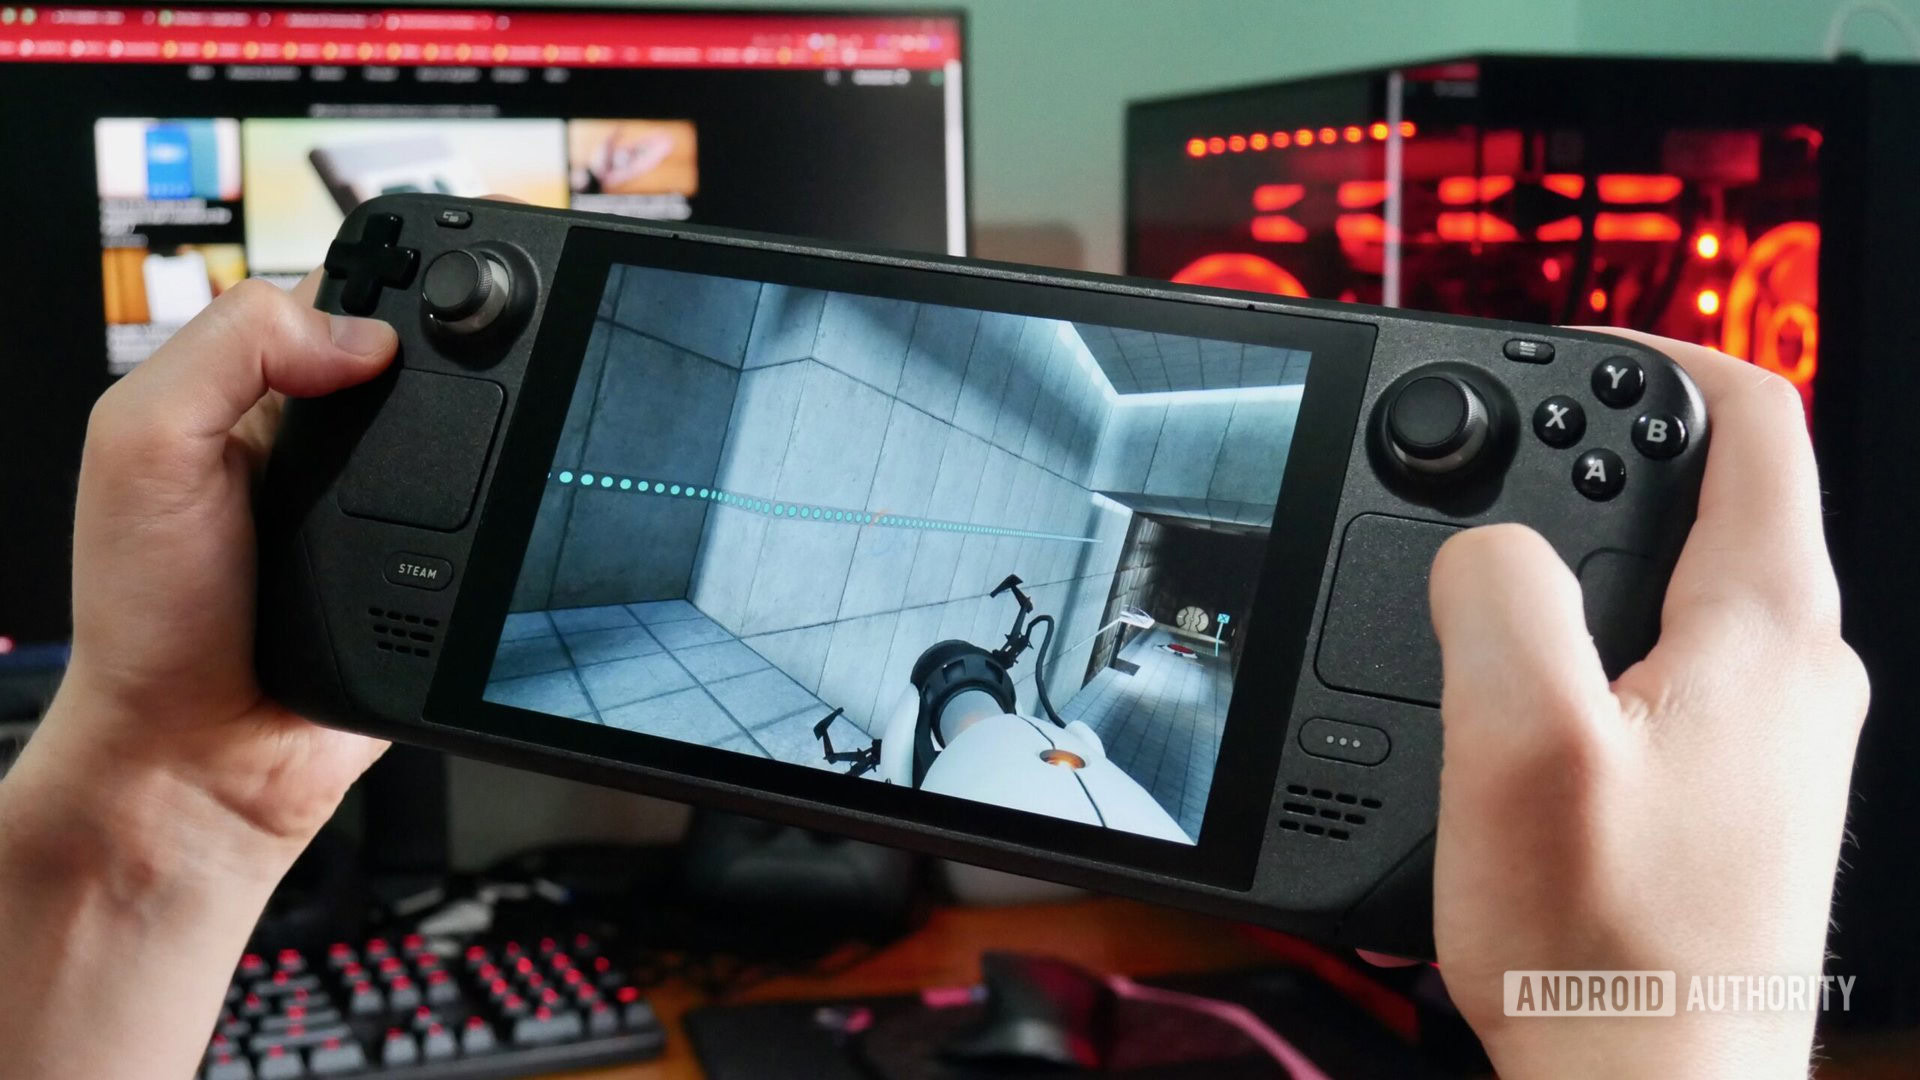 Steam Deck: Everything We Know About Valve's Handheld Gaming PC